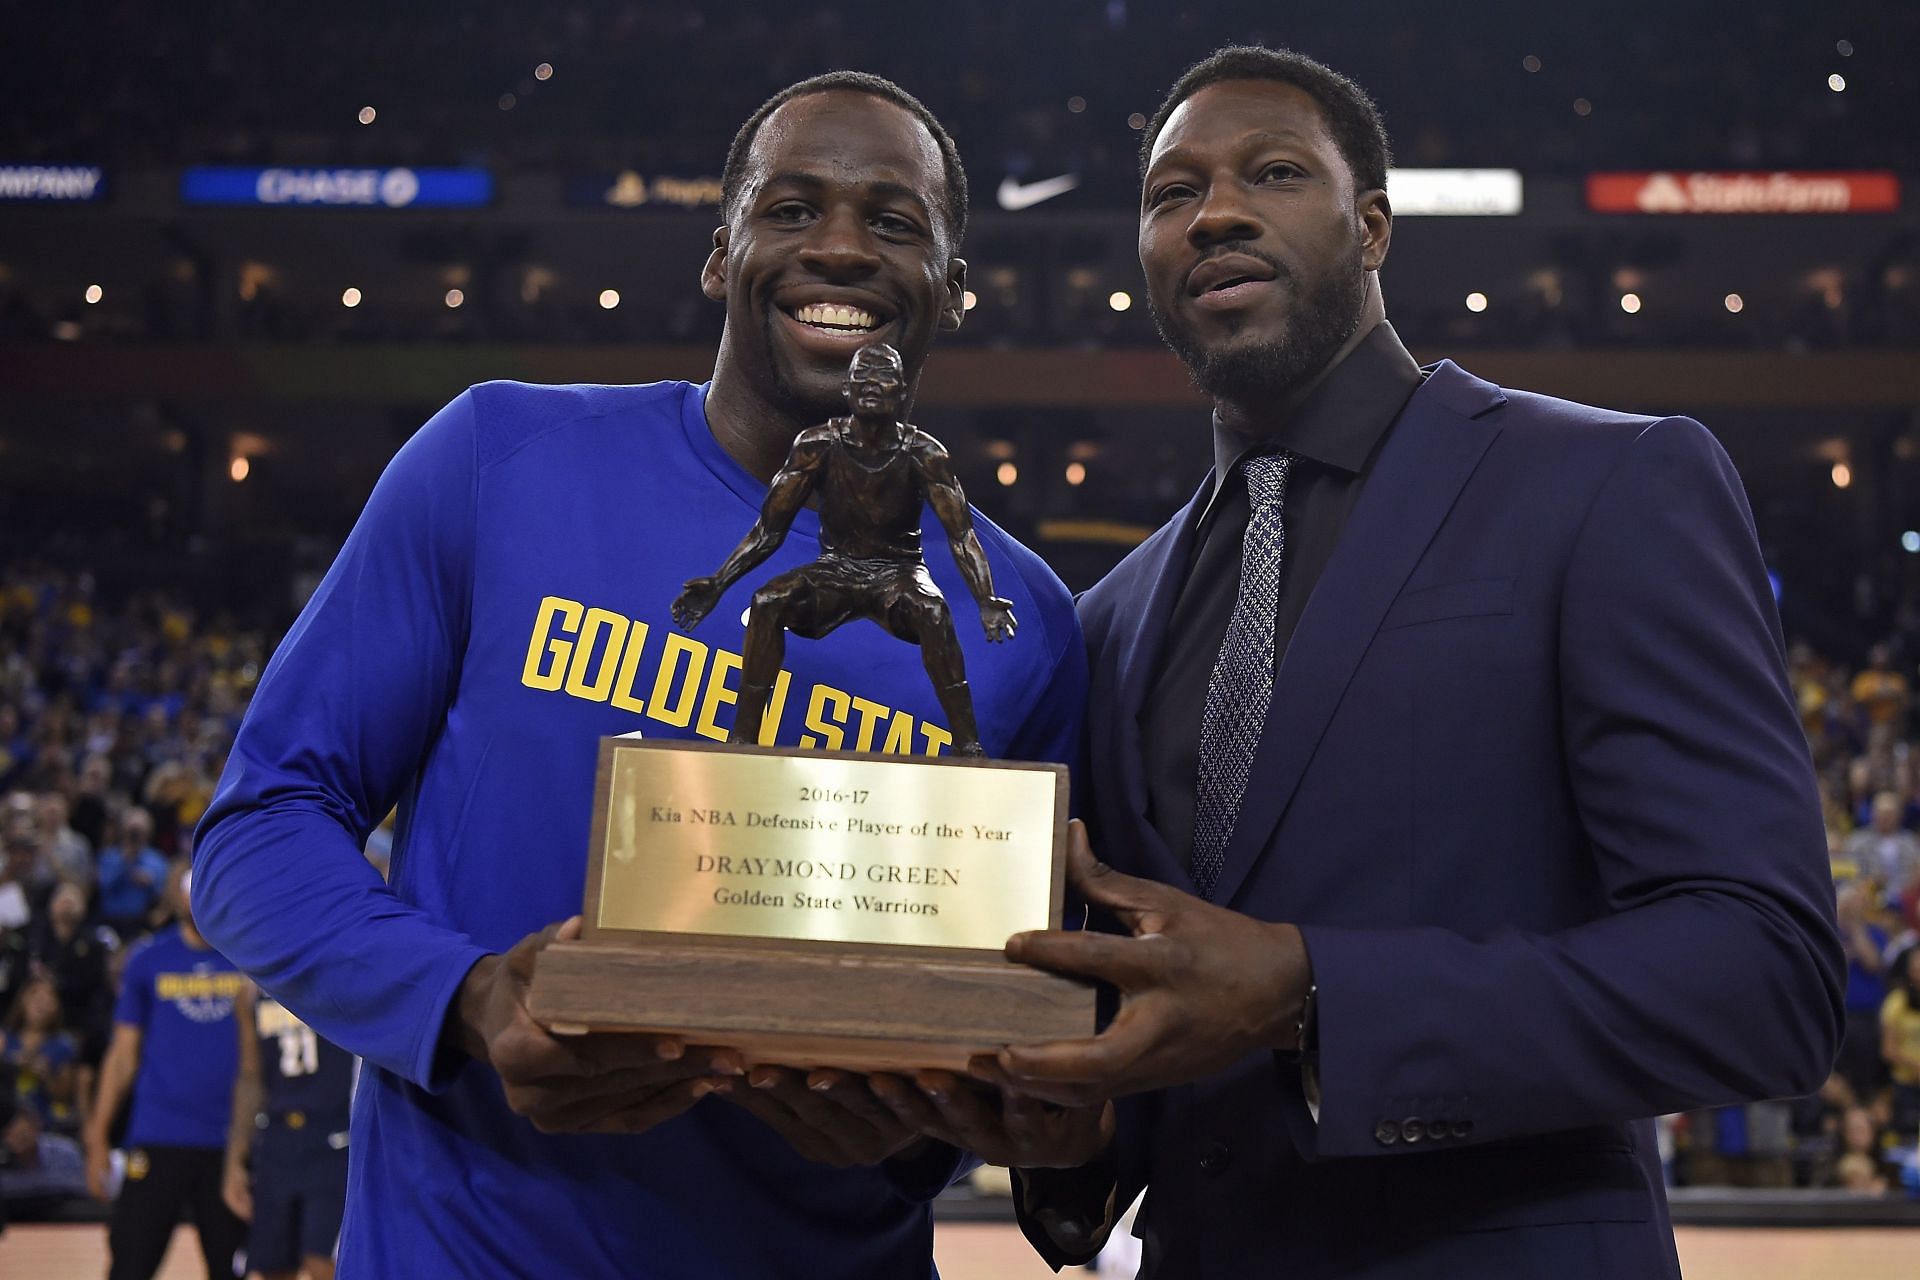 Draymond Green is handed the NBA DPOY trophy by Ben Wallace. Photo Credit: Bay Area News Group/Jose Carlos Fajardo.